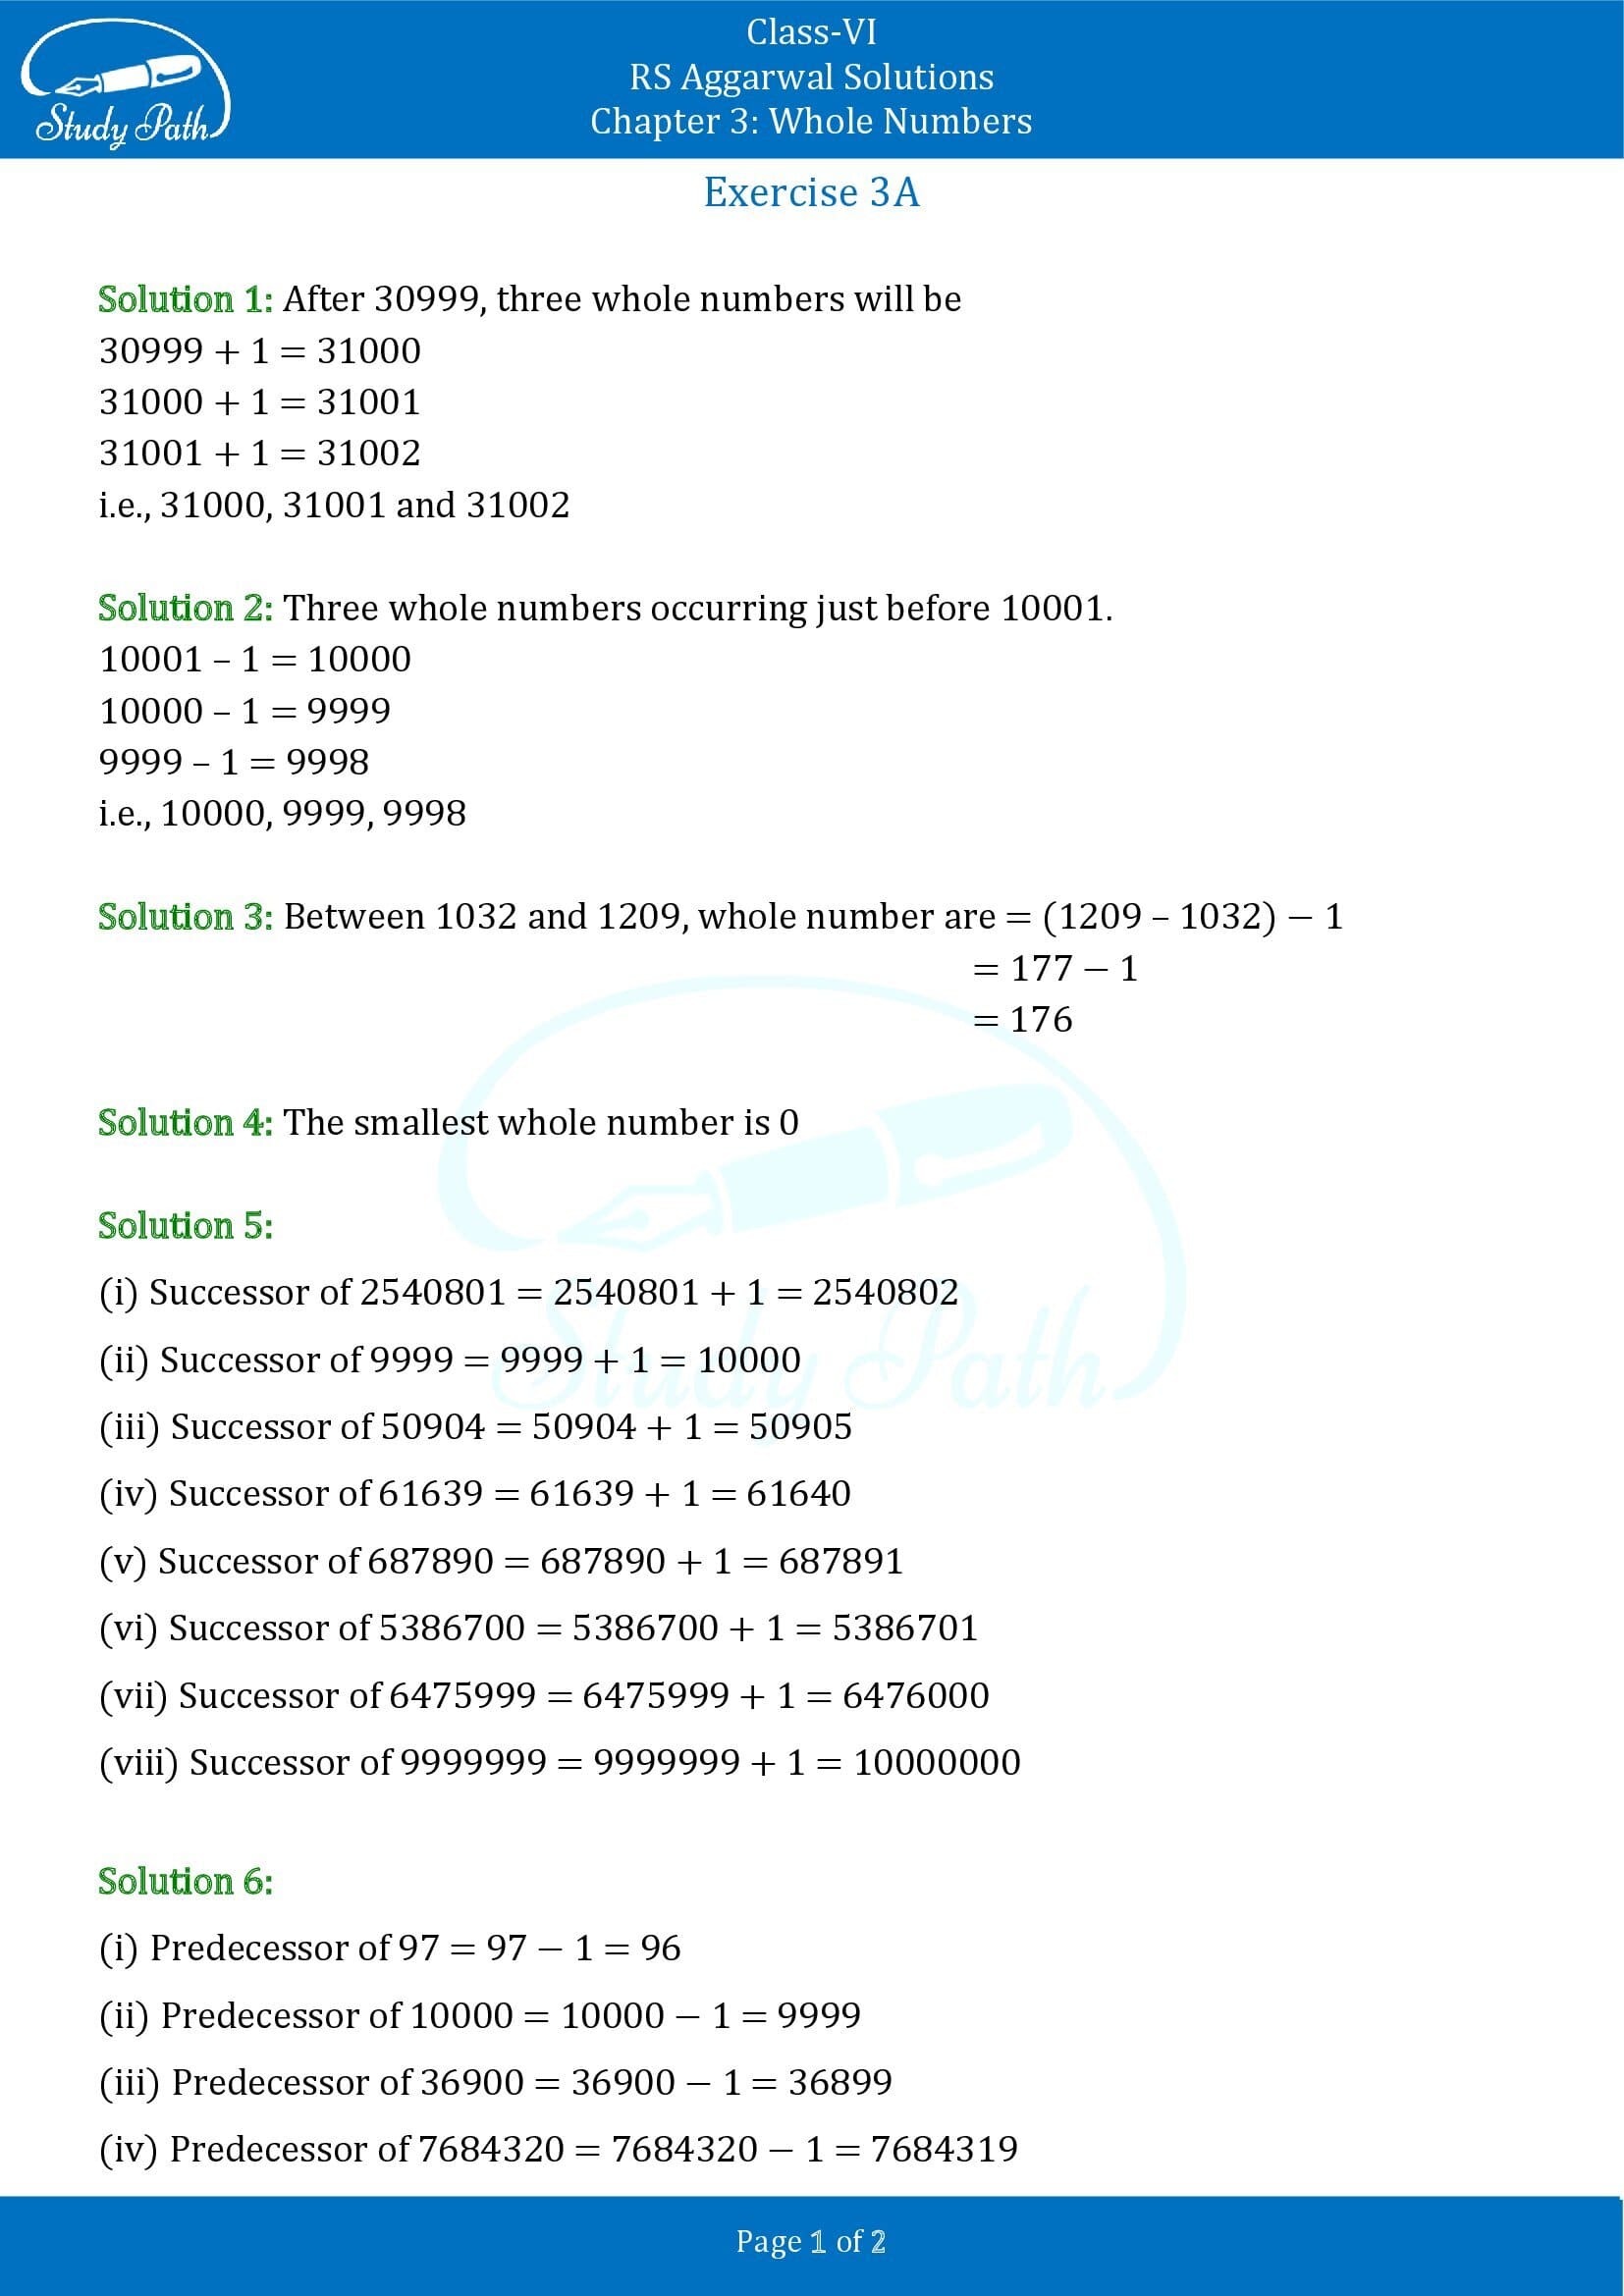 RS Aggarwal Solutions Class 6 Chapter 3 Whole Numbers Exercise 3A 00001